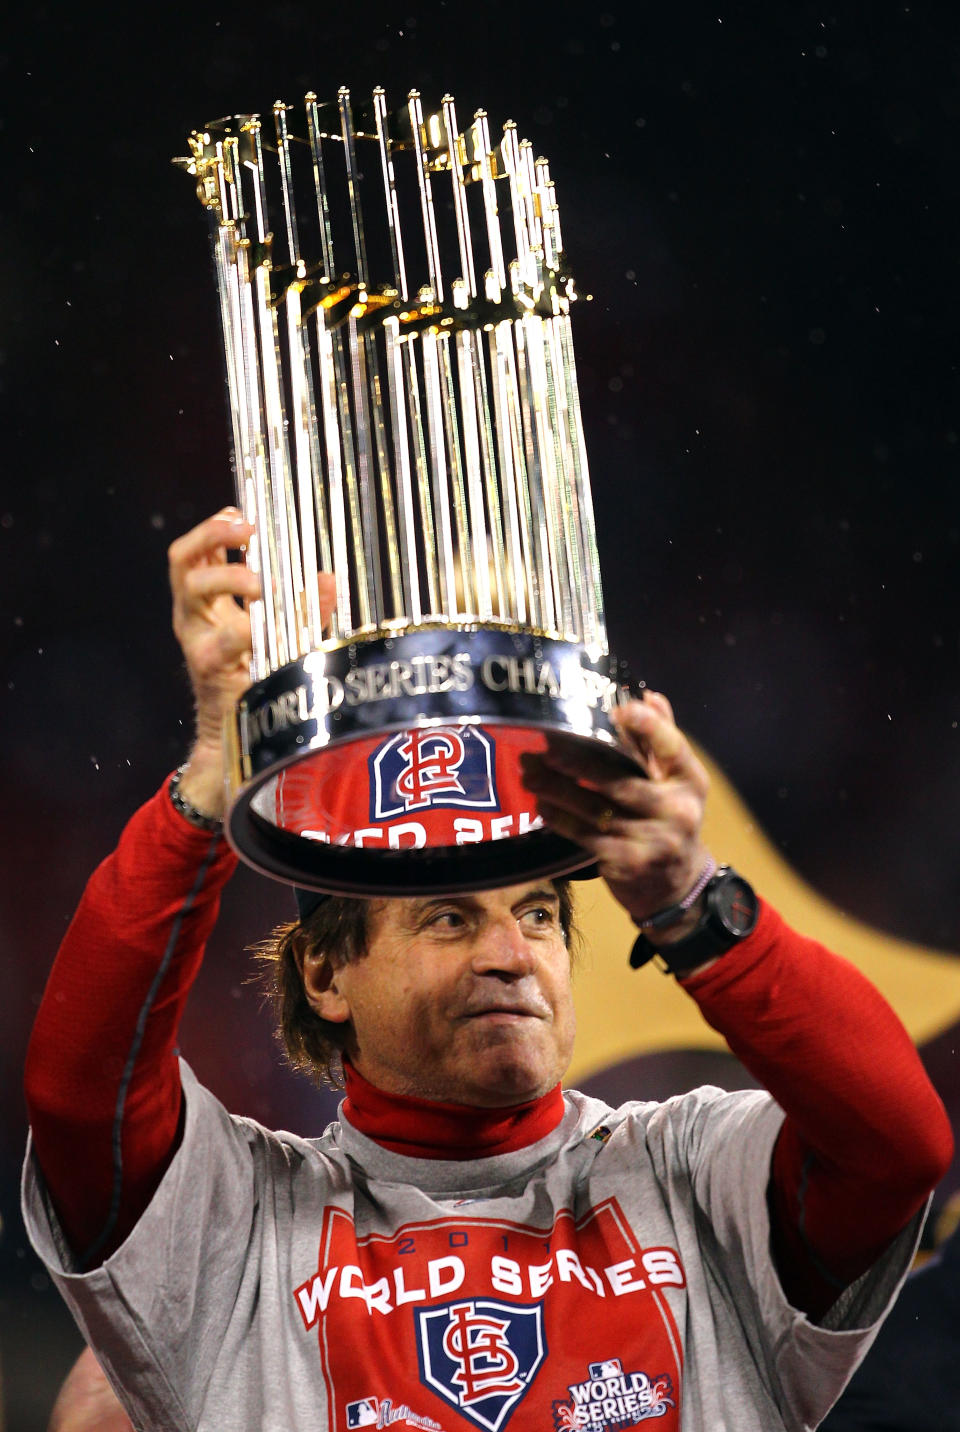 ST LOUIS, MO - OCTOBER 28: Manager Tony La Russa holds up the World Series trophy after defeating the Texas Rangers 6-2 in Game Seven of the MLB World Series at Busch Stadium on October 28, 2011 in St Louis, Missouri. (Photo by Dilip Vishwanat/Getty Images)